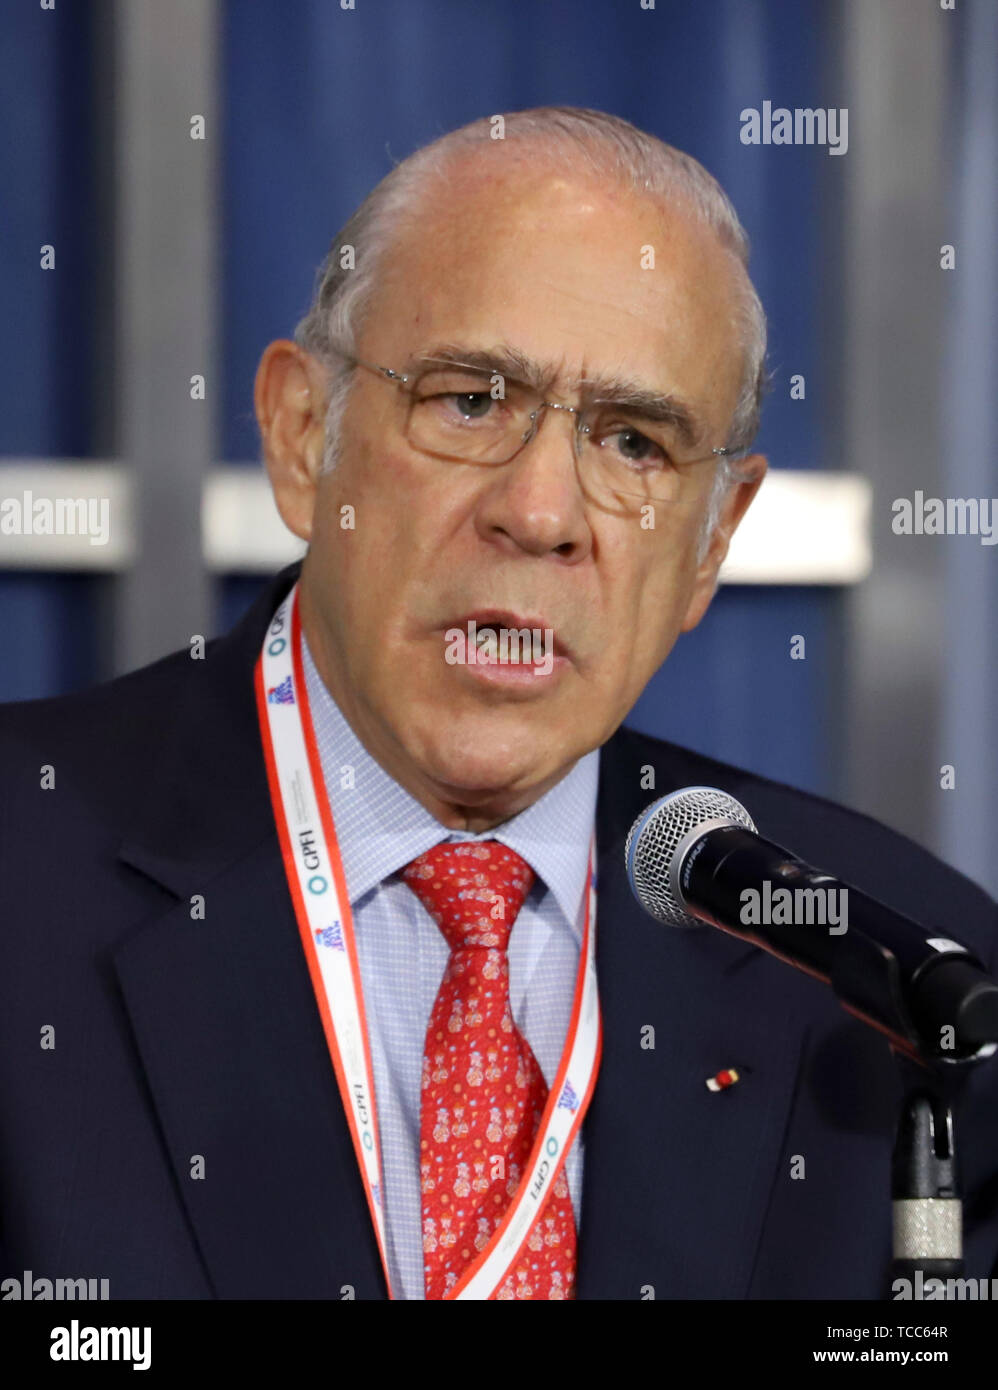 Tokyo, Japan. 7th June, 2019. The OECD Secretary General Angel Gurria delivers a keynote speech for the G20 High-level Symposium on Aging and Financial Inclusion in Tokyo on Friday, June 7, 2019. The symposium is a connected to the G20 Finance Ministers and Central Bank Governors meeting which will be held in Fukuoka on June 8 and 9. Credit: Yoshio Tsunoda/AFLO/Alamy Live News Stock Photo